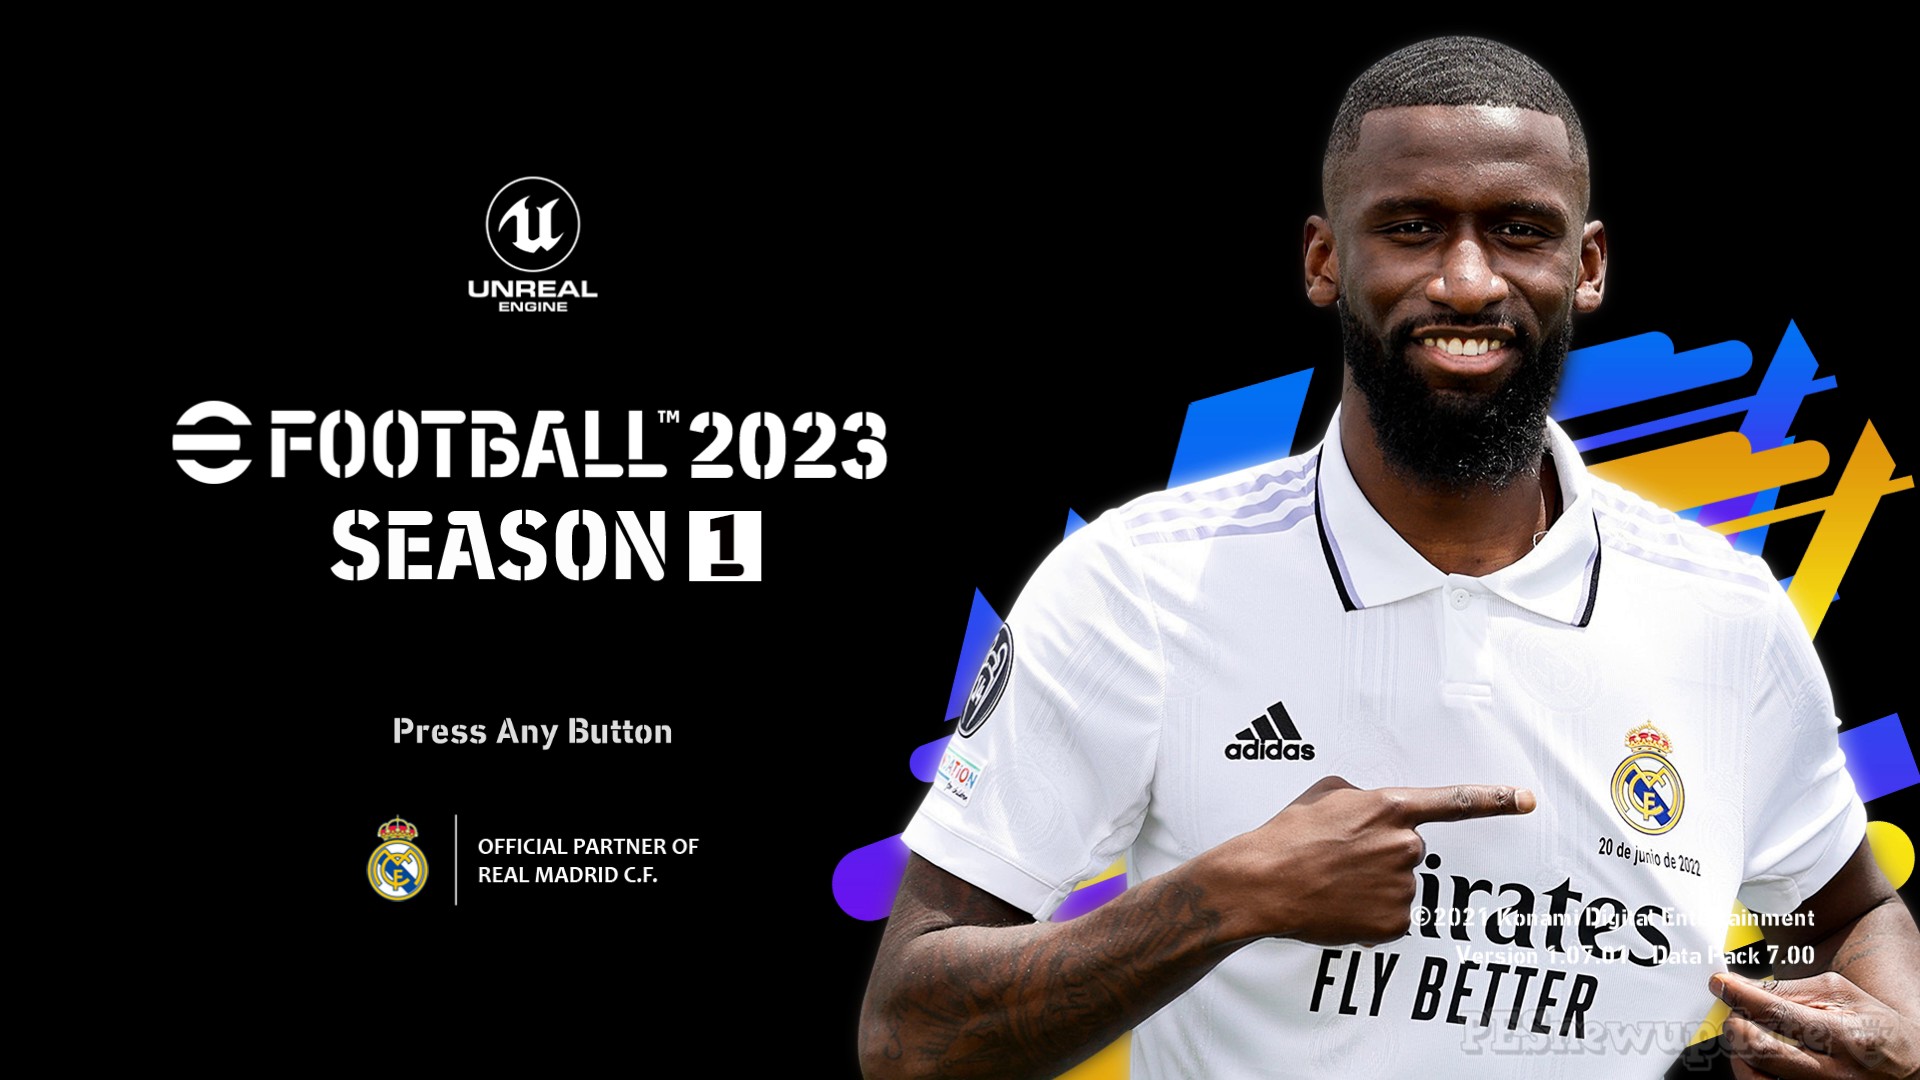 eFootball 2023 SEASON 1 CONCEPT V2 Menu by PESNewupdate PESNewupdate.com. Free Download Latest Pro Evolution Soccer Patch & Updates